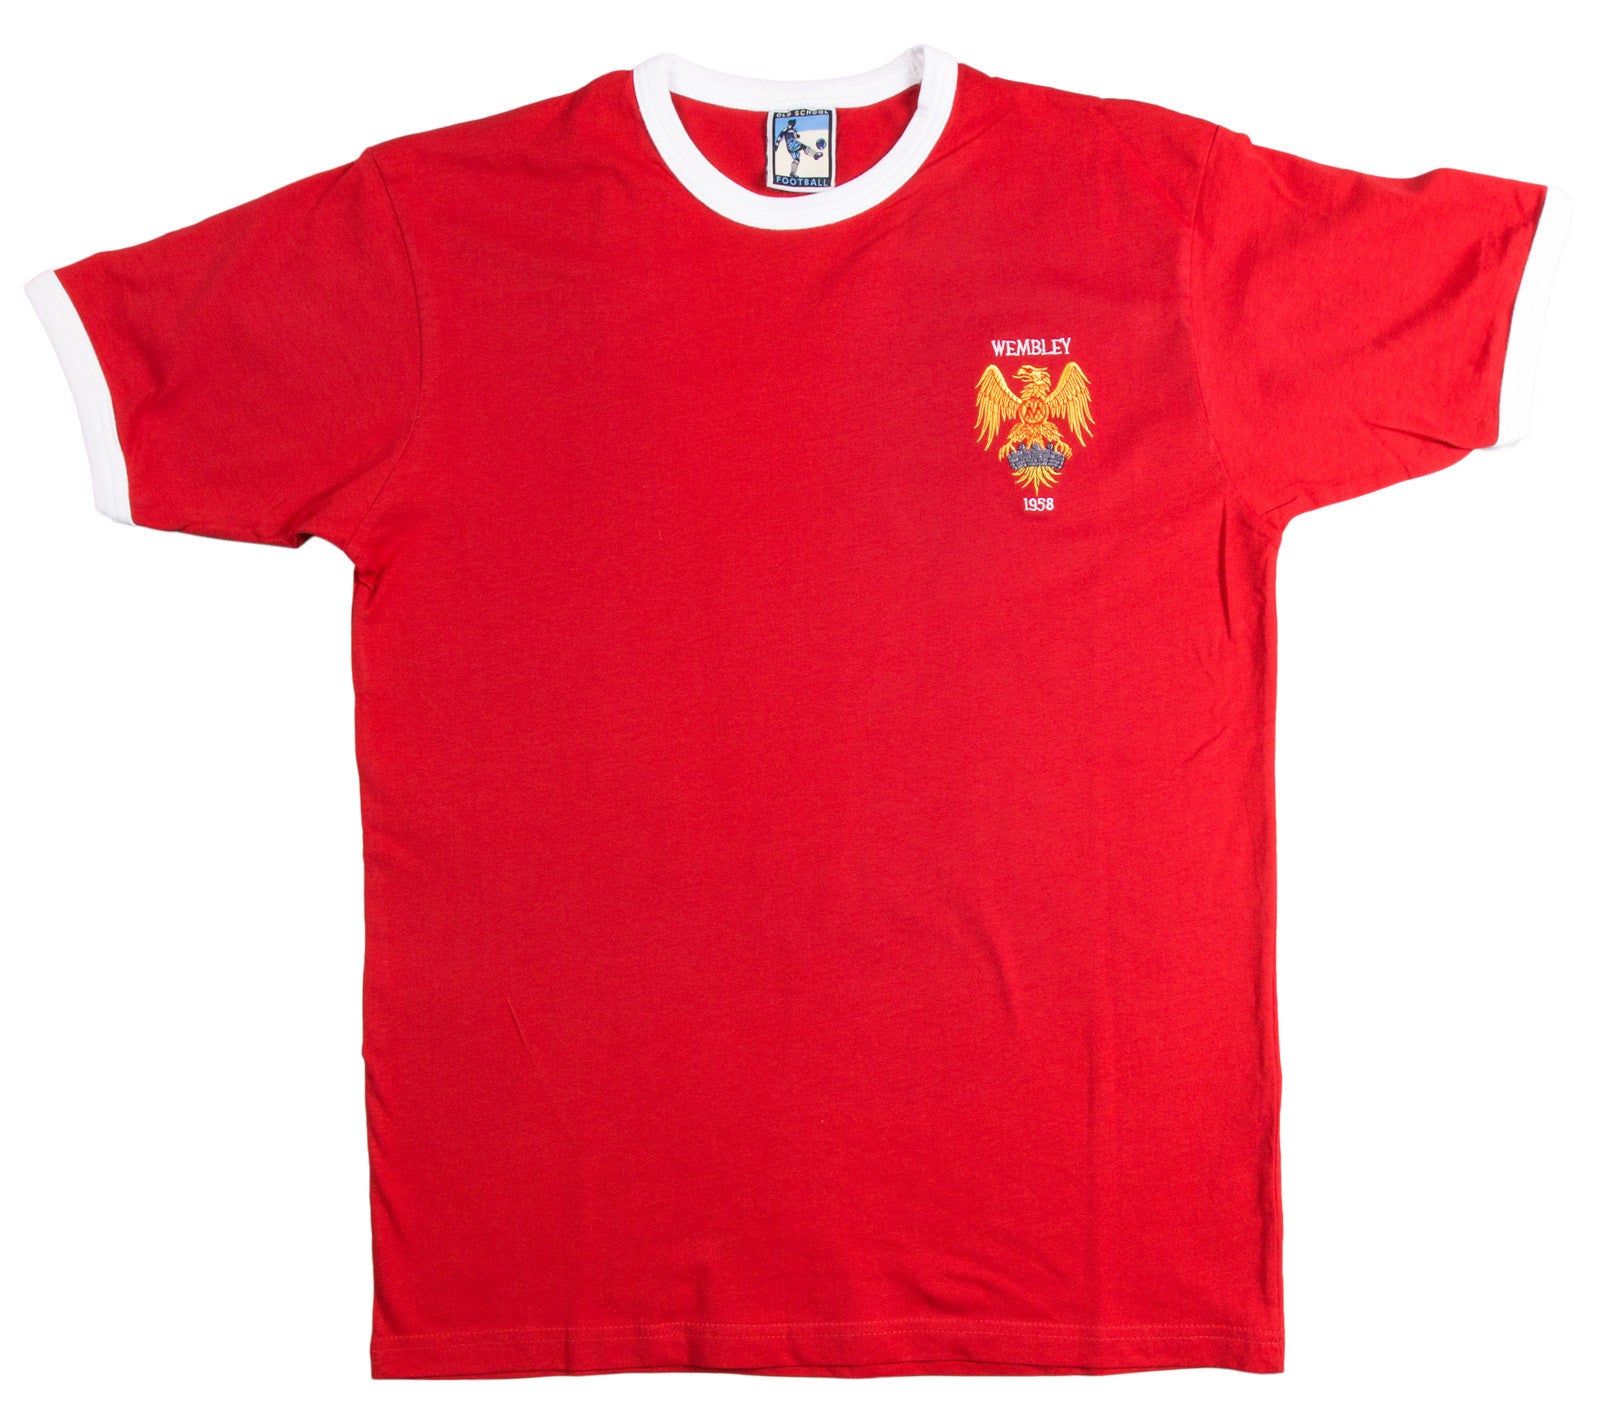 Manchester United Retro Football T Shirt 1958 FA Cup Final – Old School